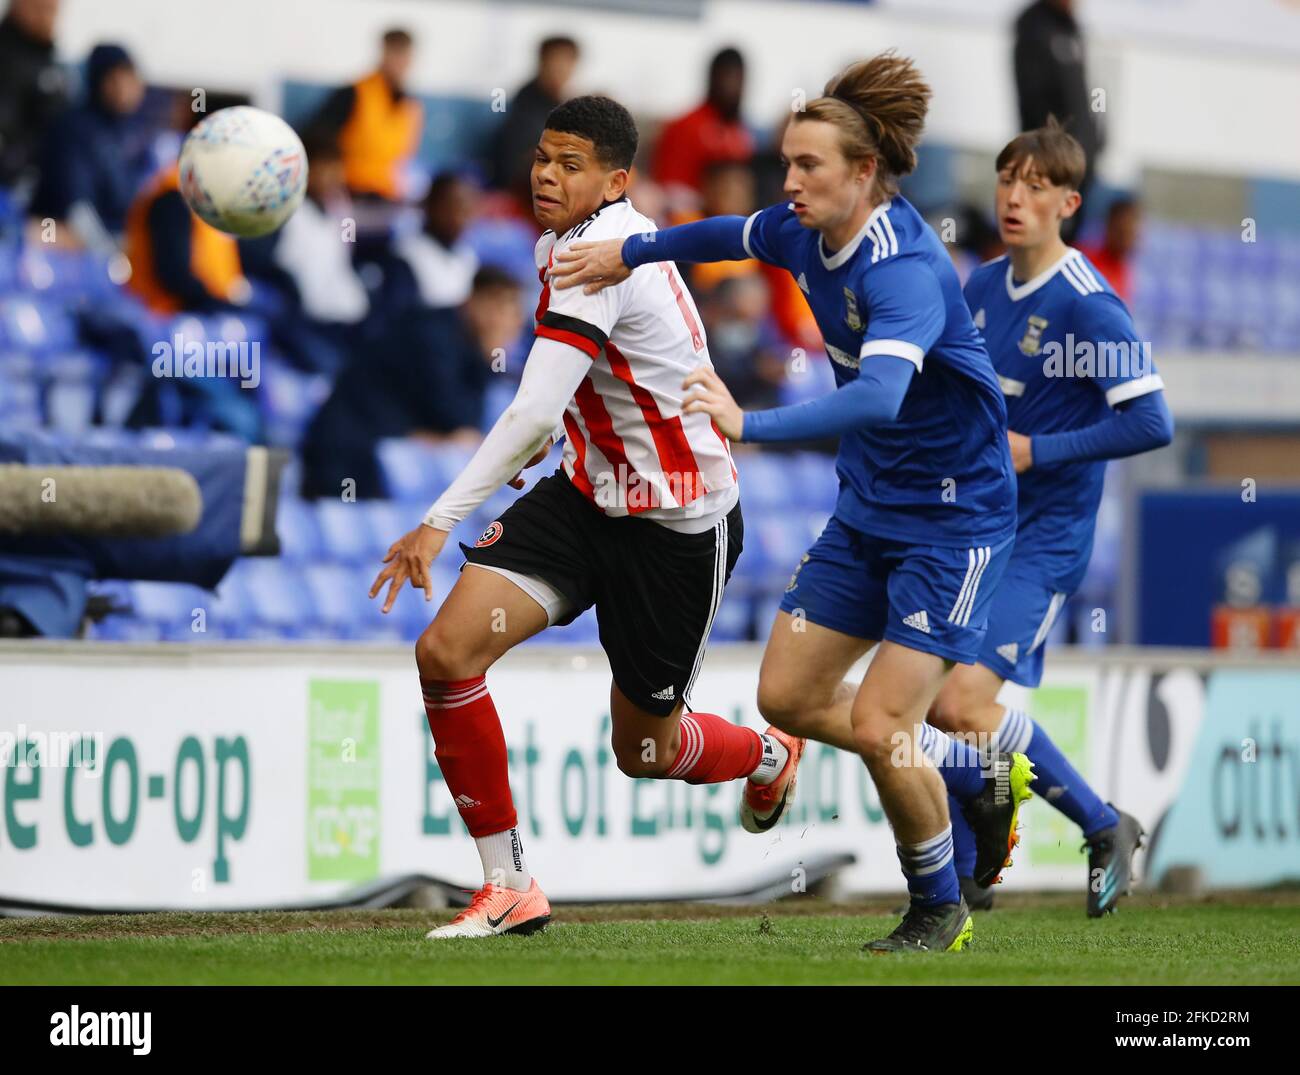 Ipswich, England, 30th April 2021. Will Osula of Sheffield Utd in action during the The English FA Youth Cup match at Portman Road, Ipswich. Picture credit should read: David Klein / Sportimage Credit: Sportimage/Alamy Live News Stock Photo